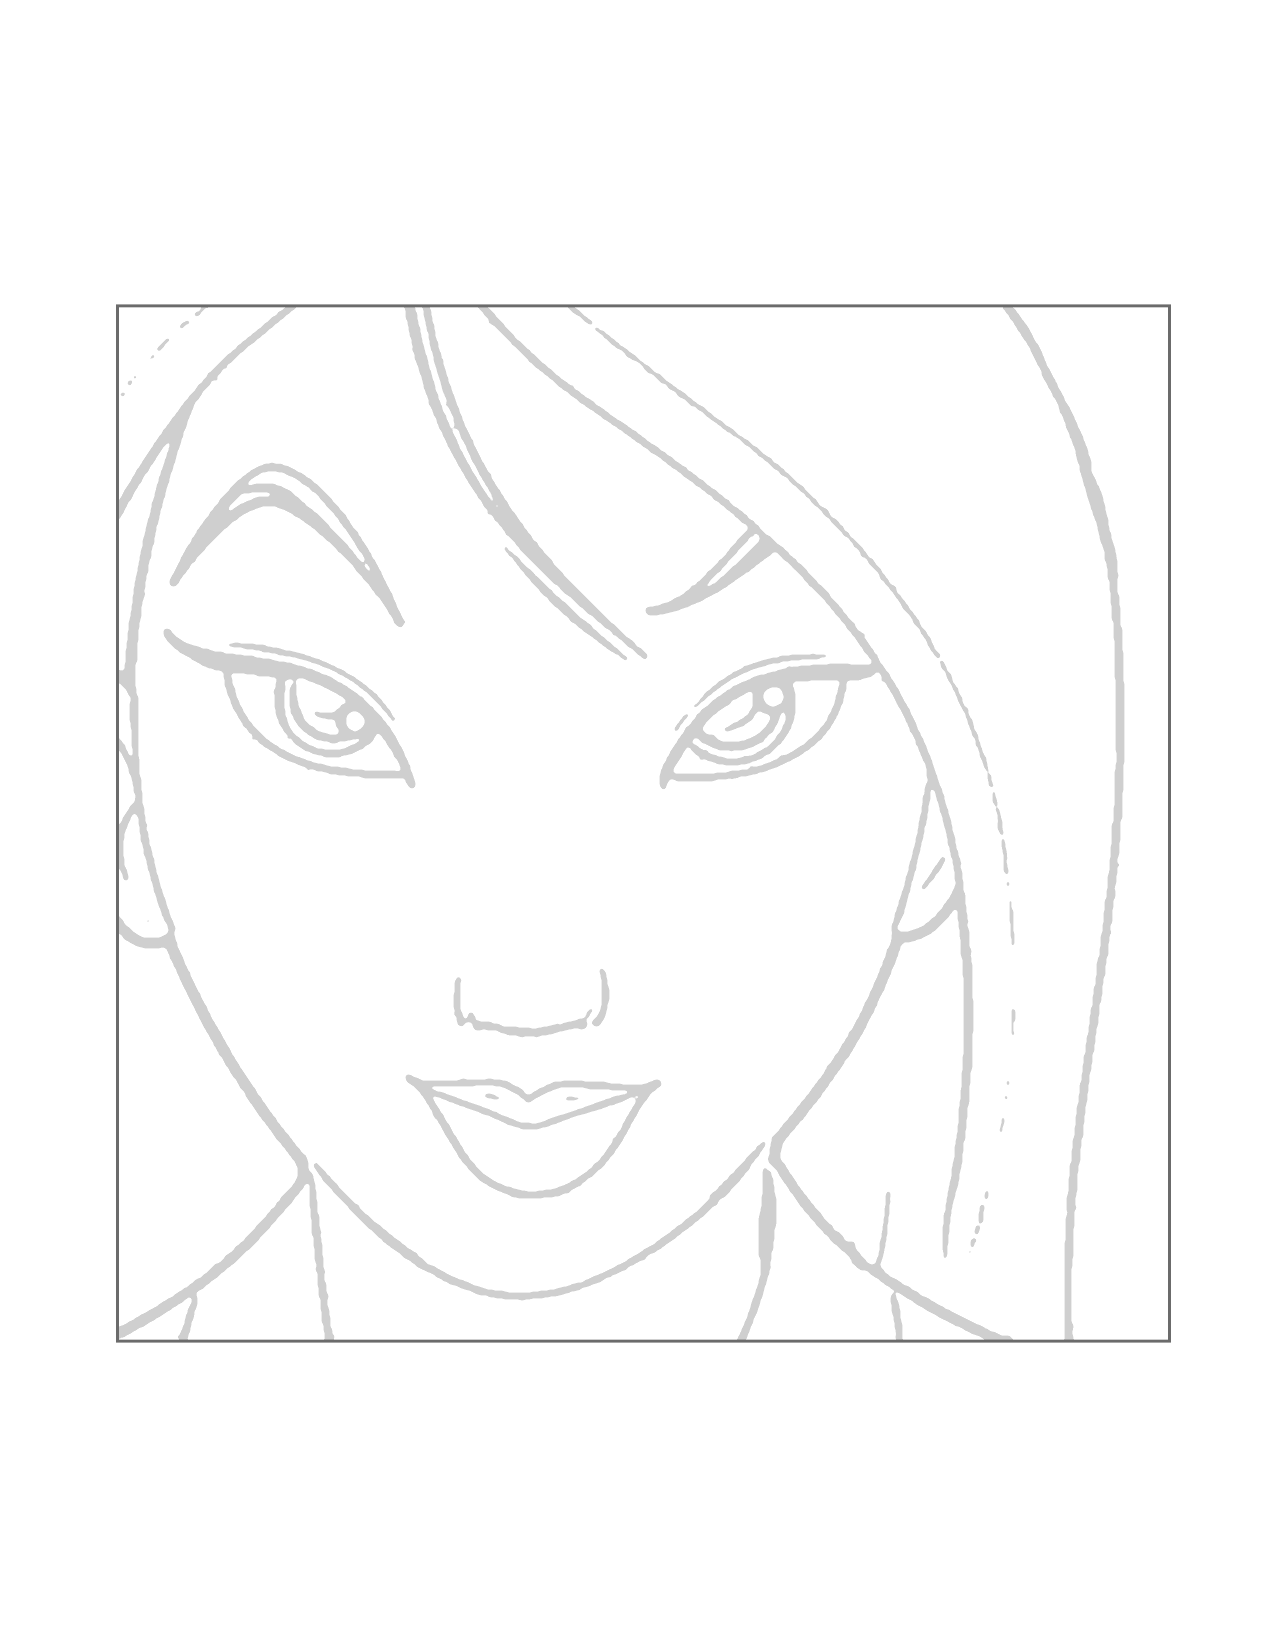 Mulan Traceable Coloring Page